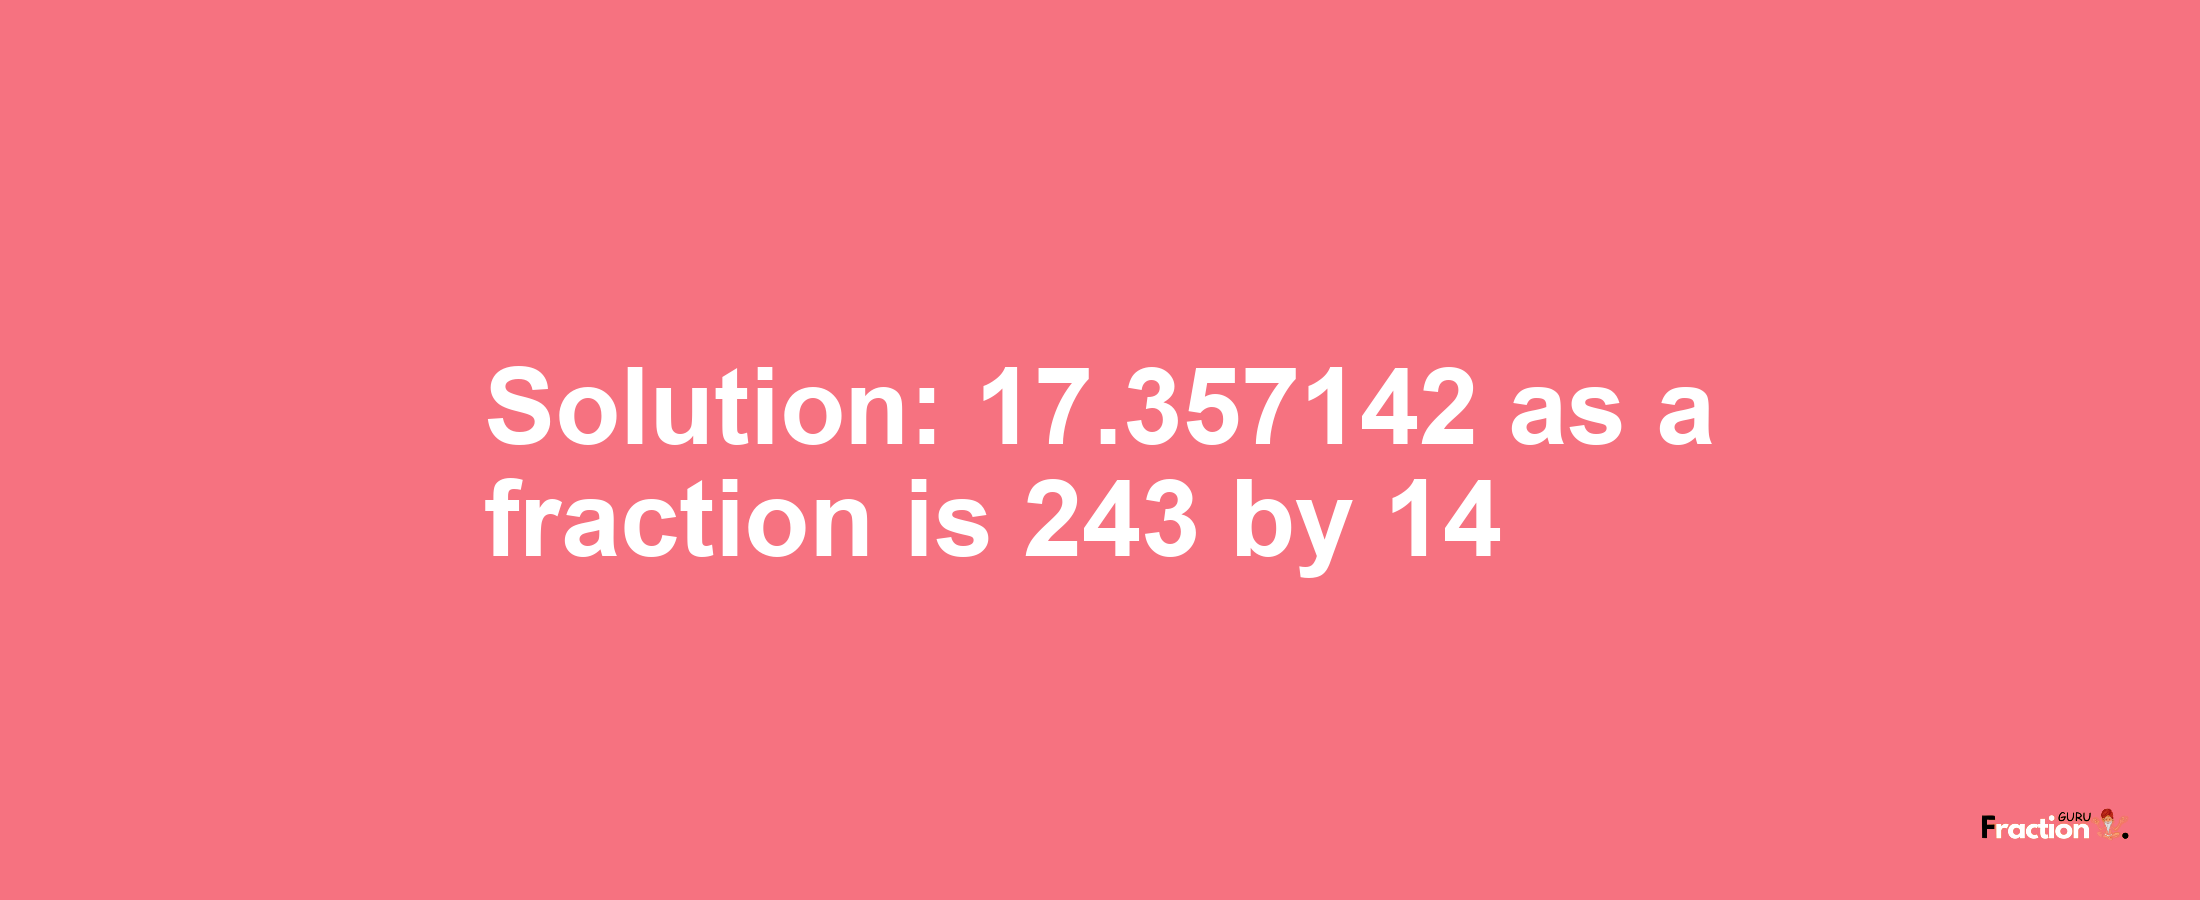 Solution:17.357142 as a fraction is 243/14